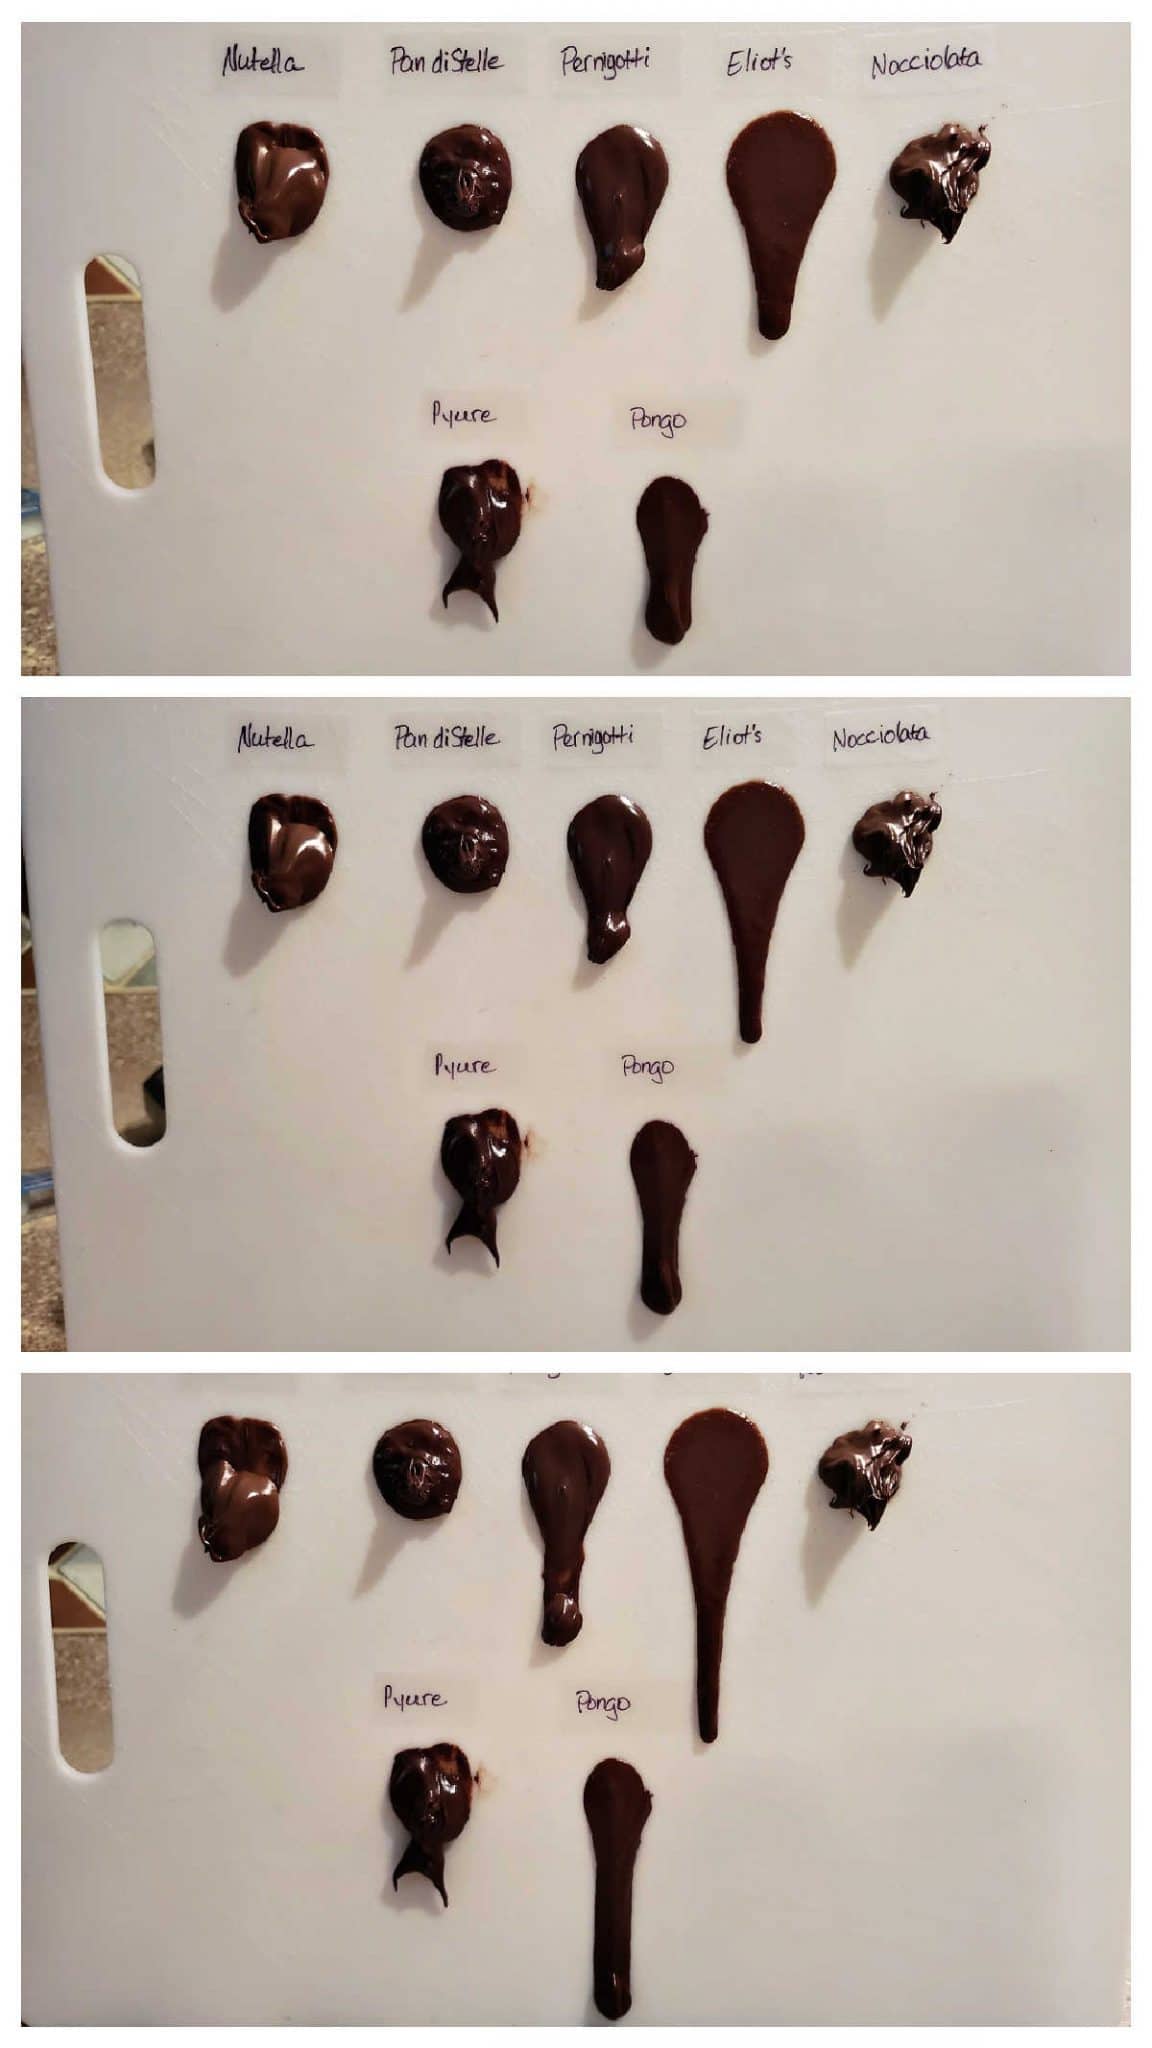 Collage of 3 images showing how blobs of different brands of chocolate hazelnut spread slide down a cutting board over 5 minutes.